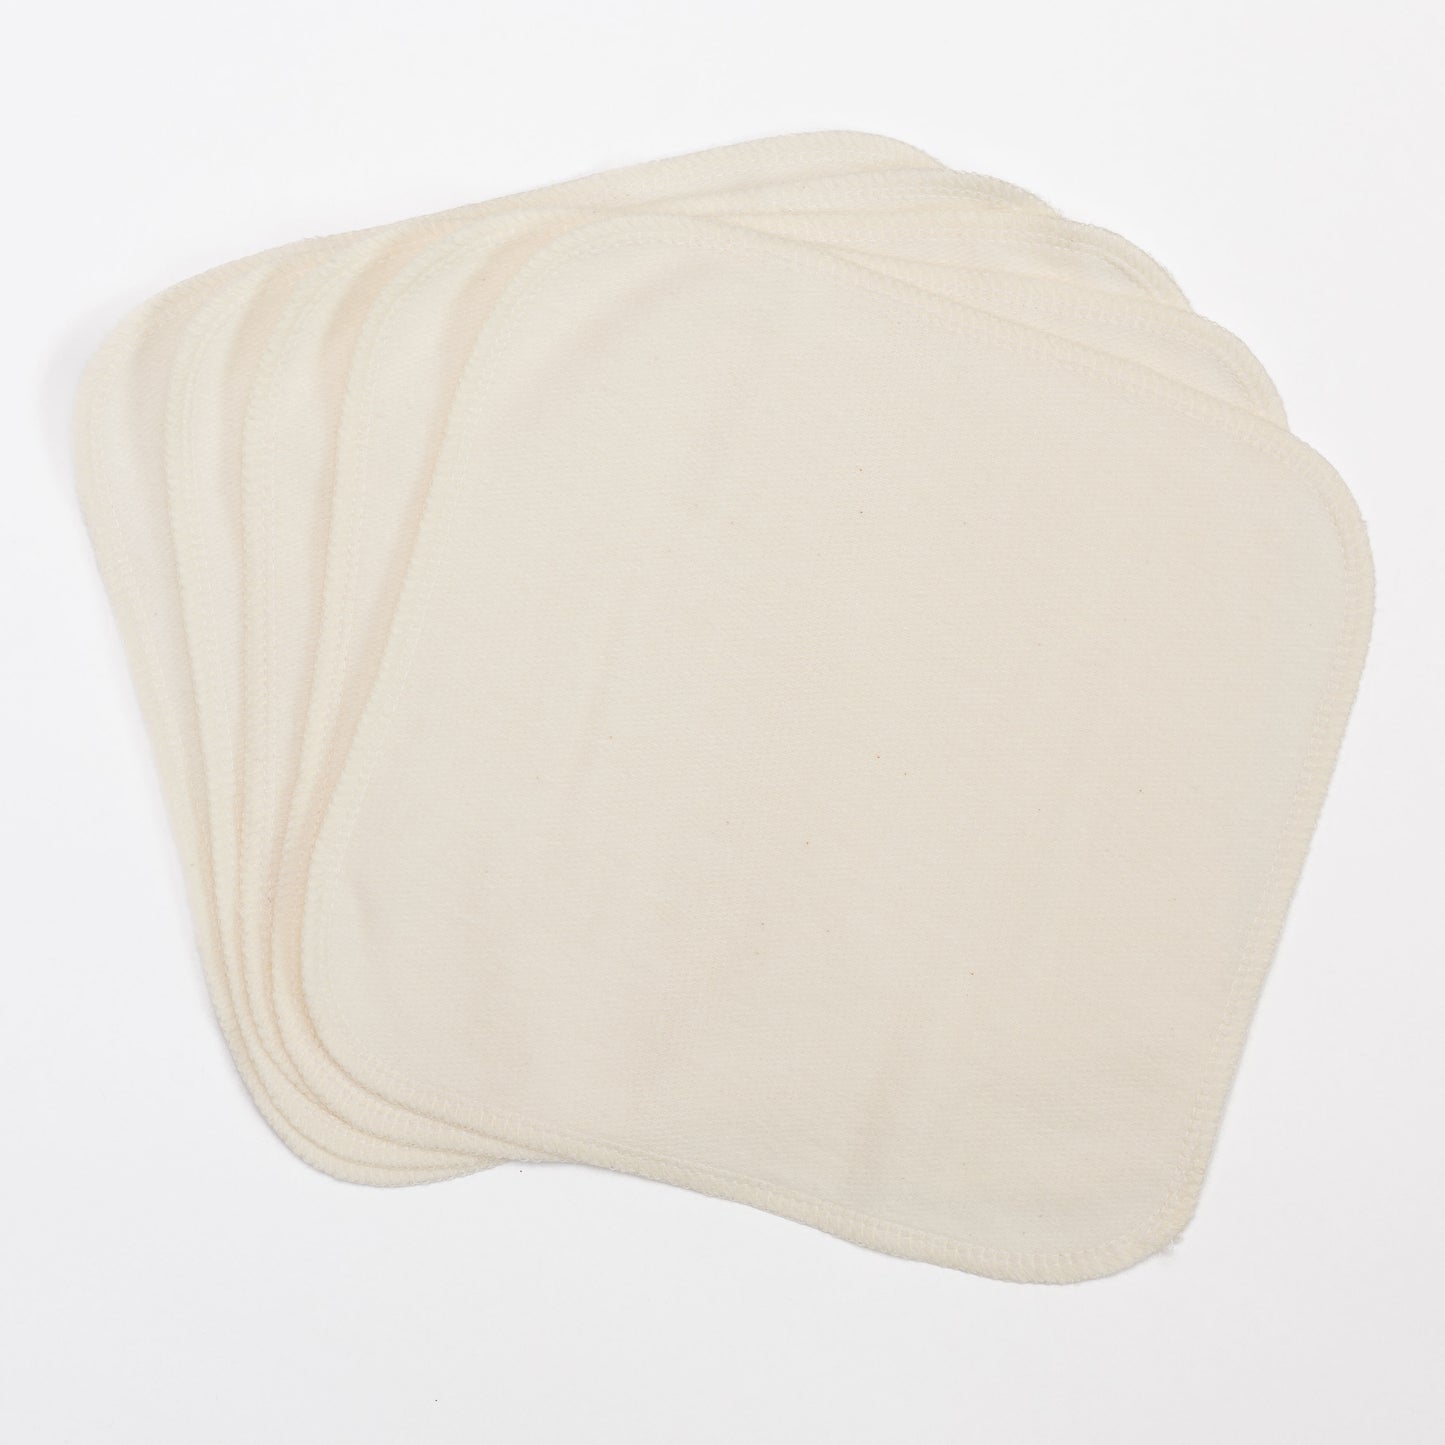 NEW MATERIAL - Bamboo/Organic Cotton Fleece Washcloths - Pack of 5